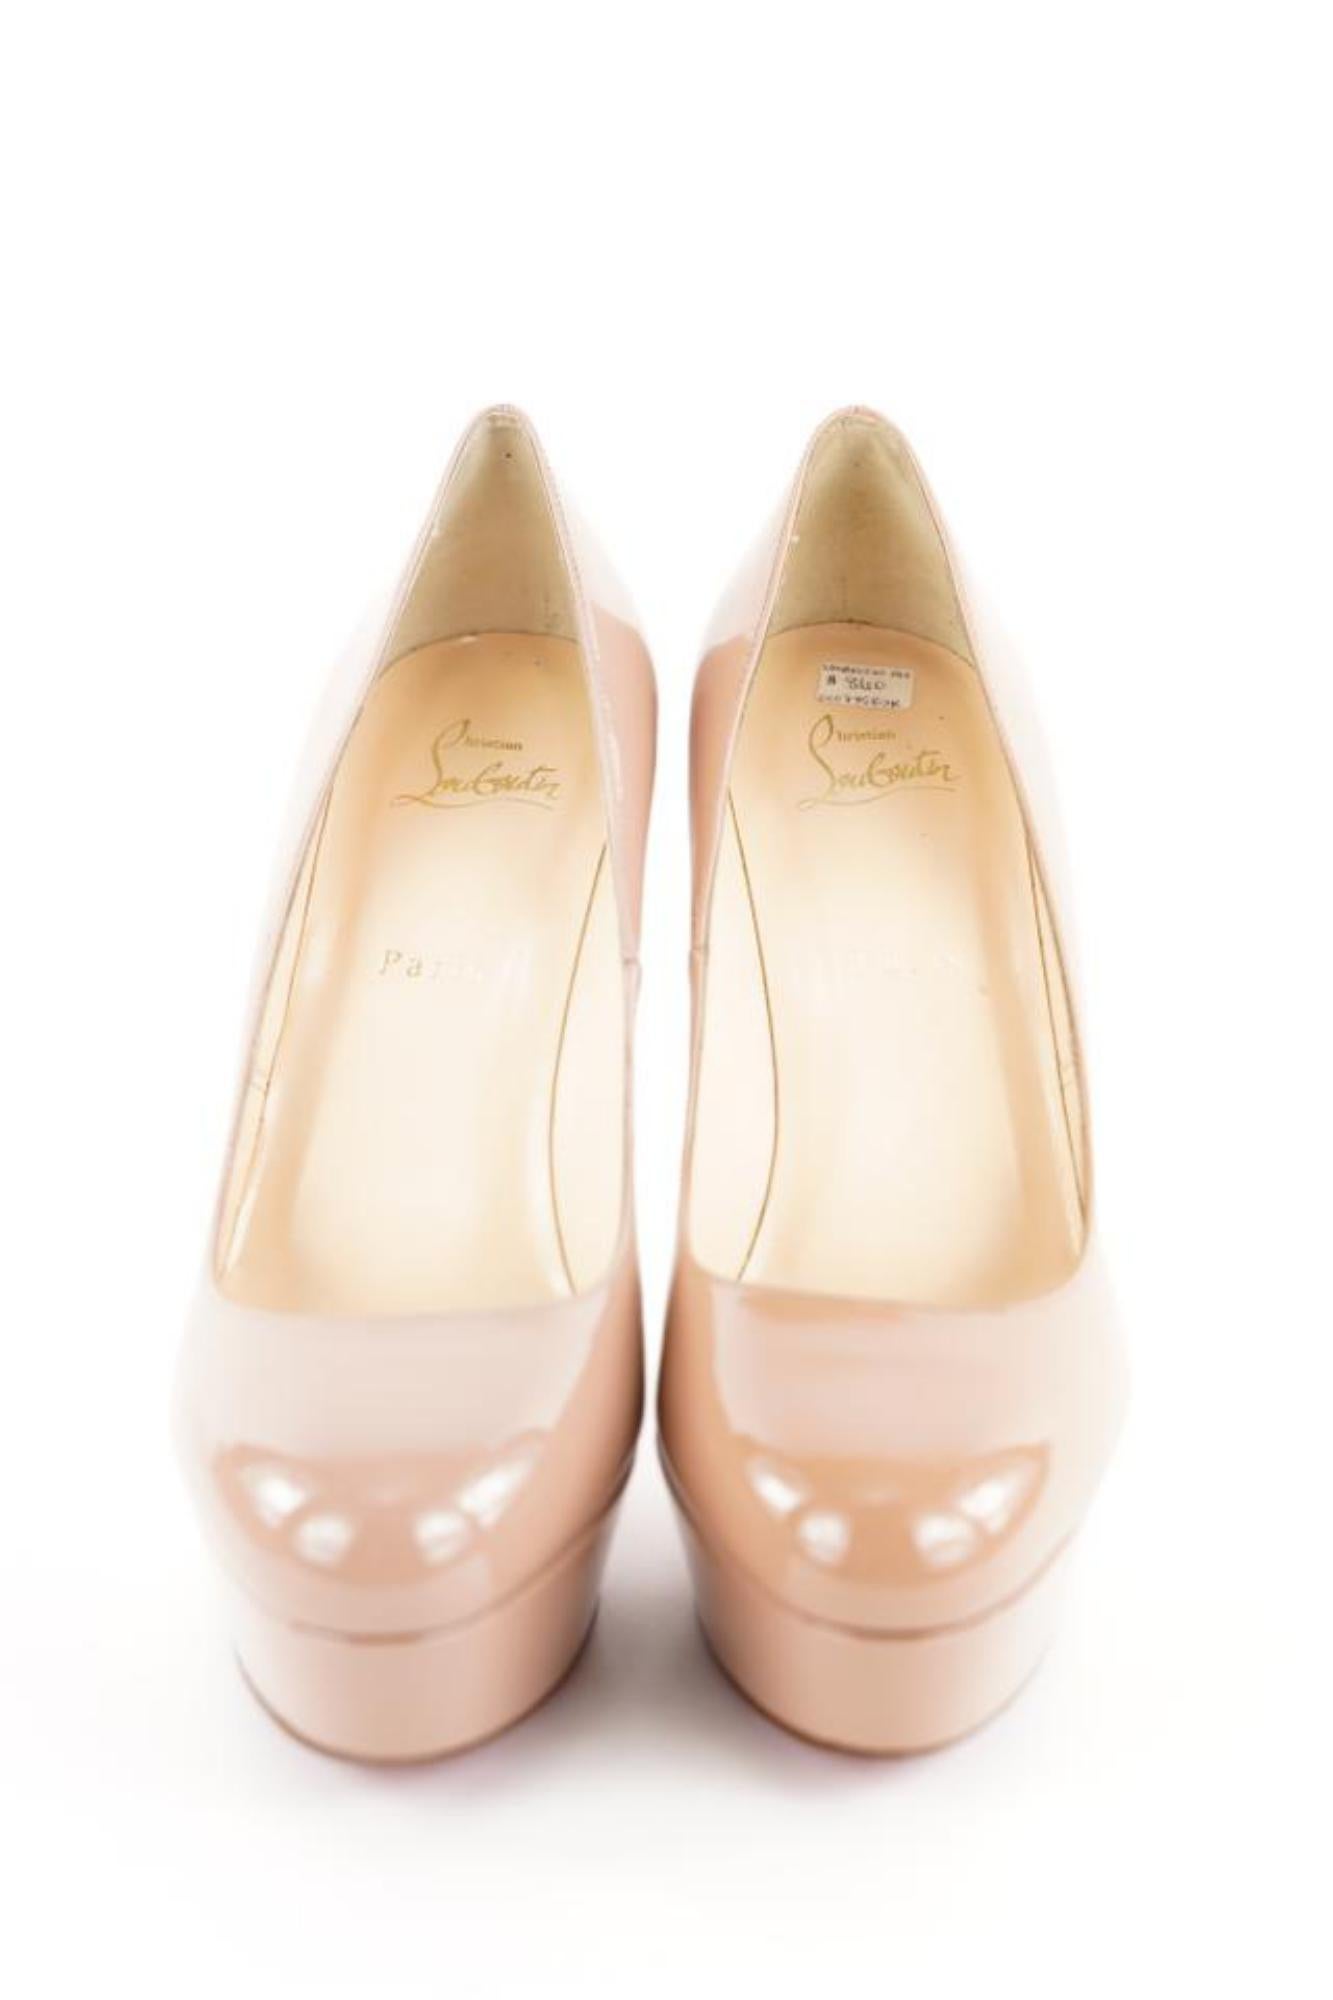 Beige Christian Louboutin Size 39.5 Nude Bianca 120 Patent Calf Heels 4CL928 For Sale